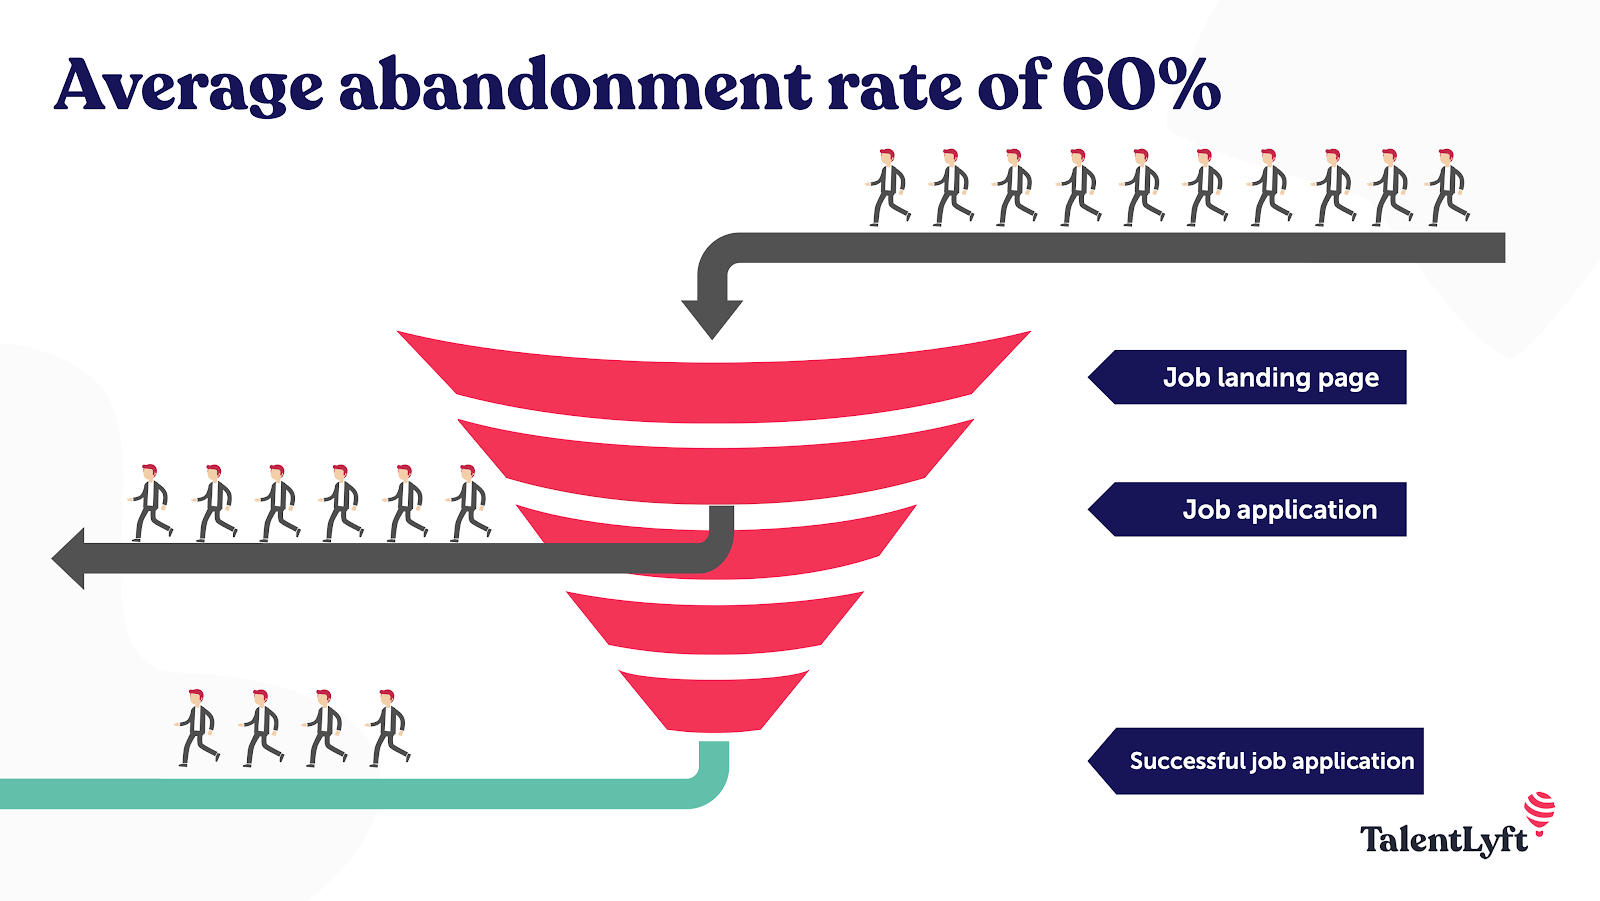 Average abandonment rate on career sites